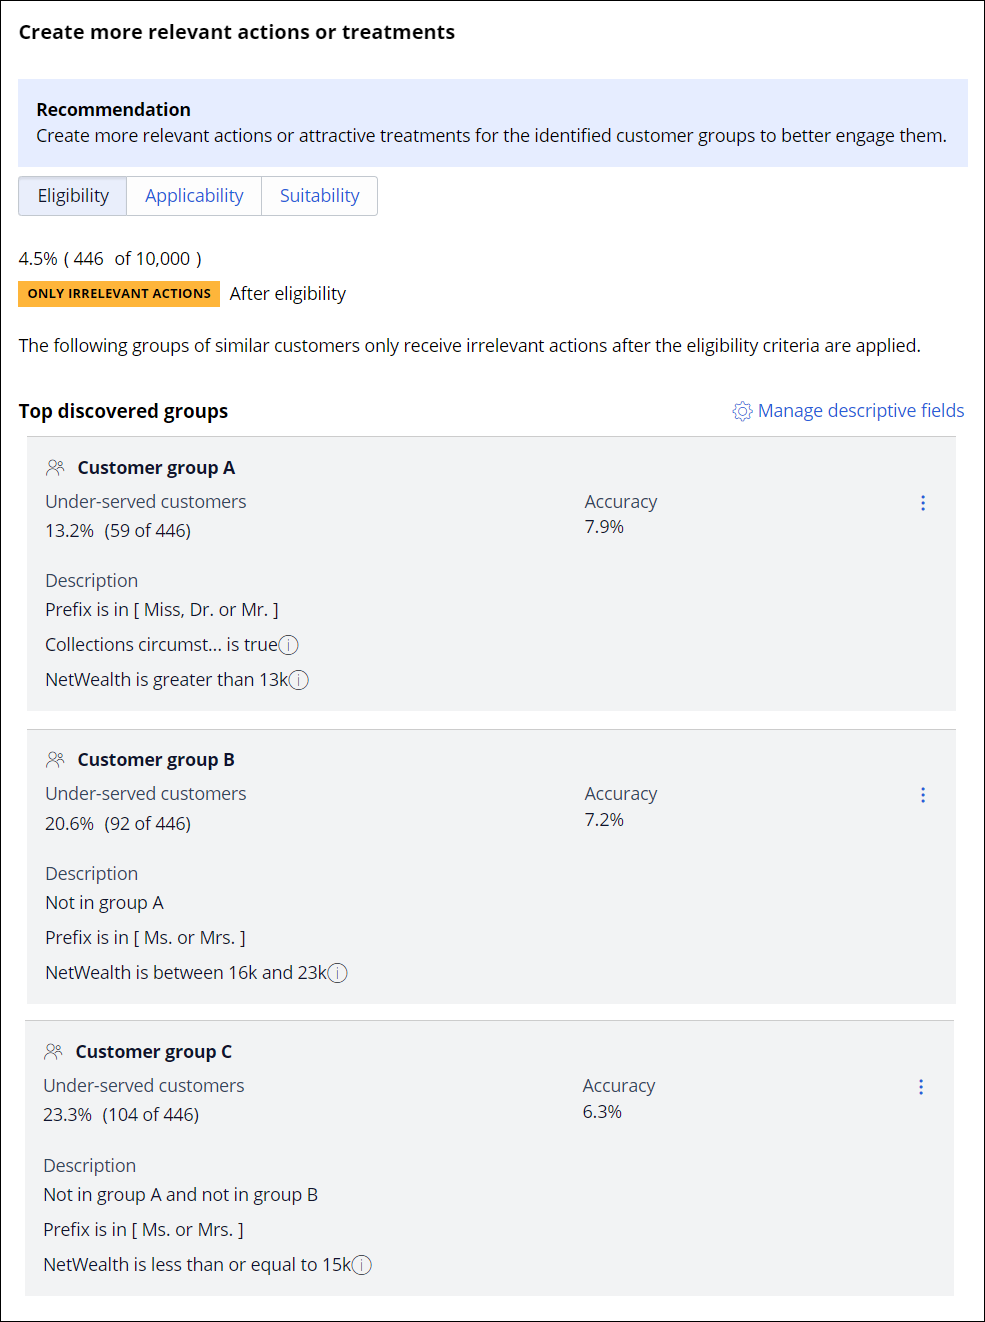 The Create more relevant actions or treatments section showing customer group A discovered by Value Finder. Description includes age, income, value, and sentiment.